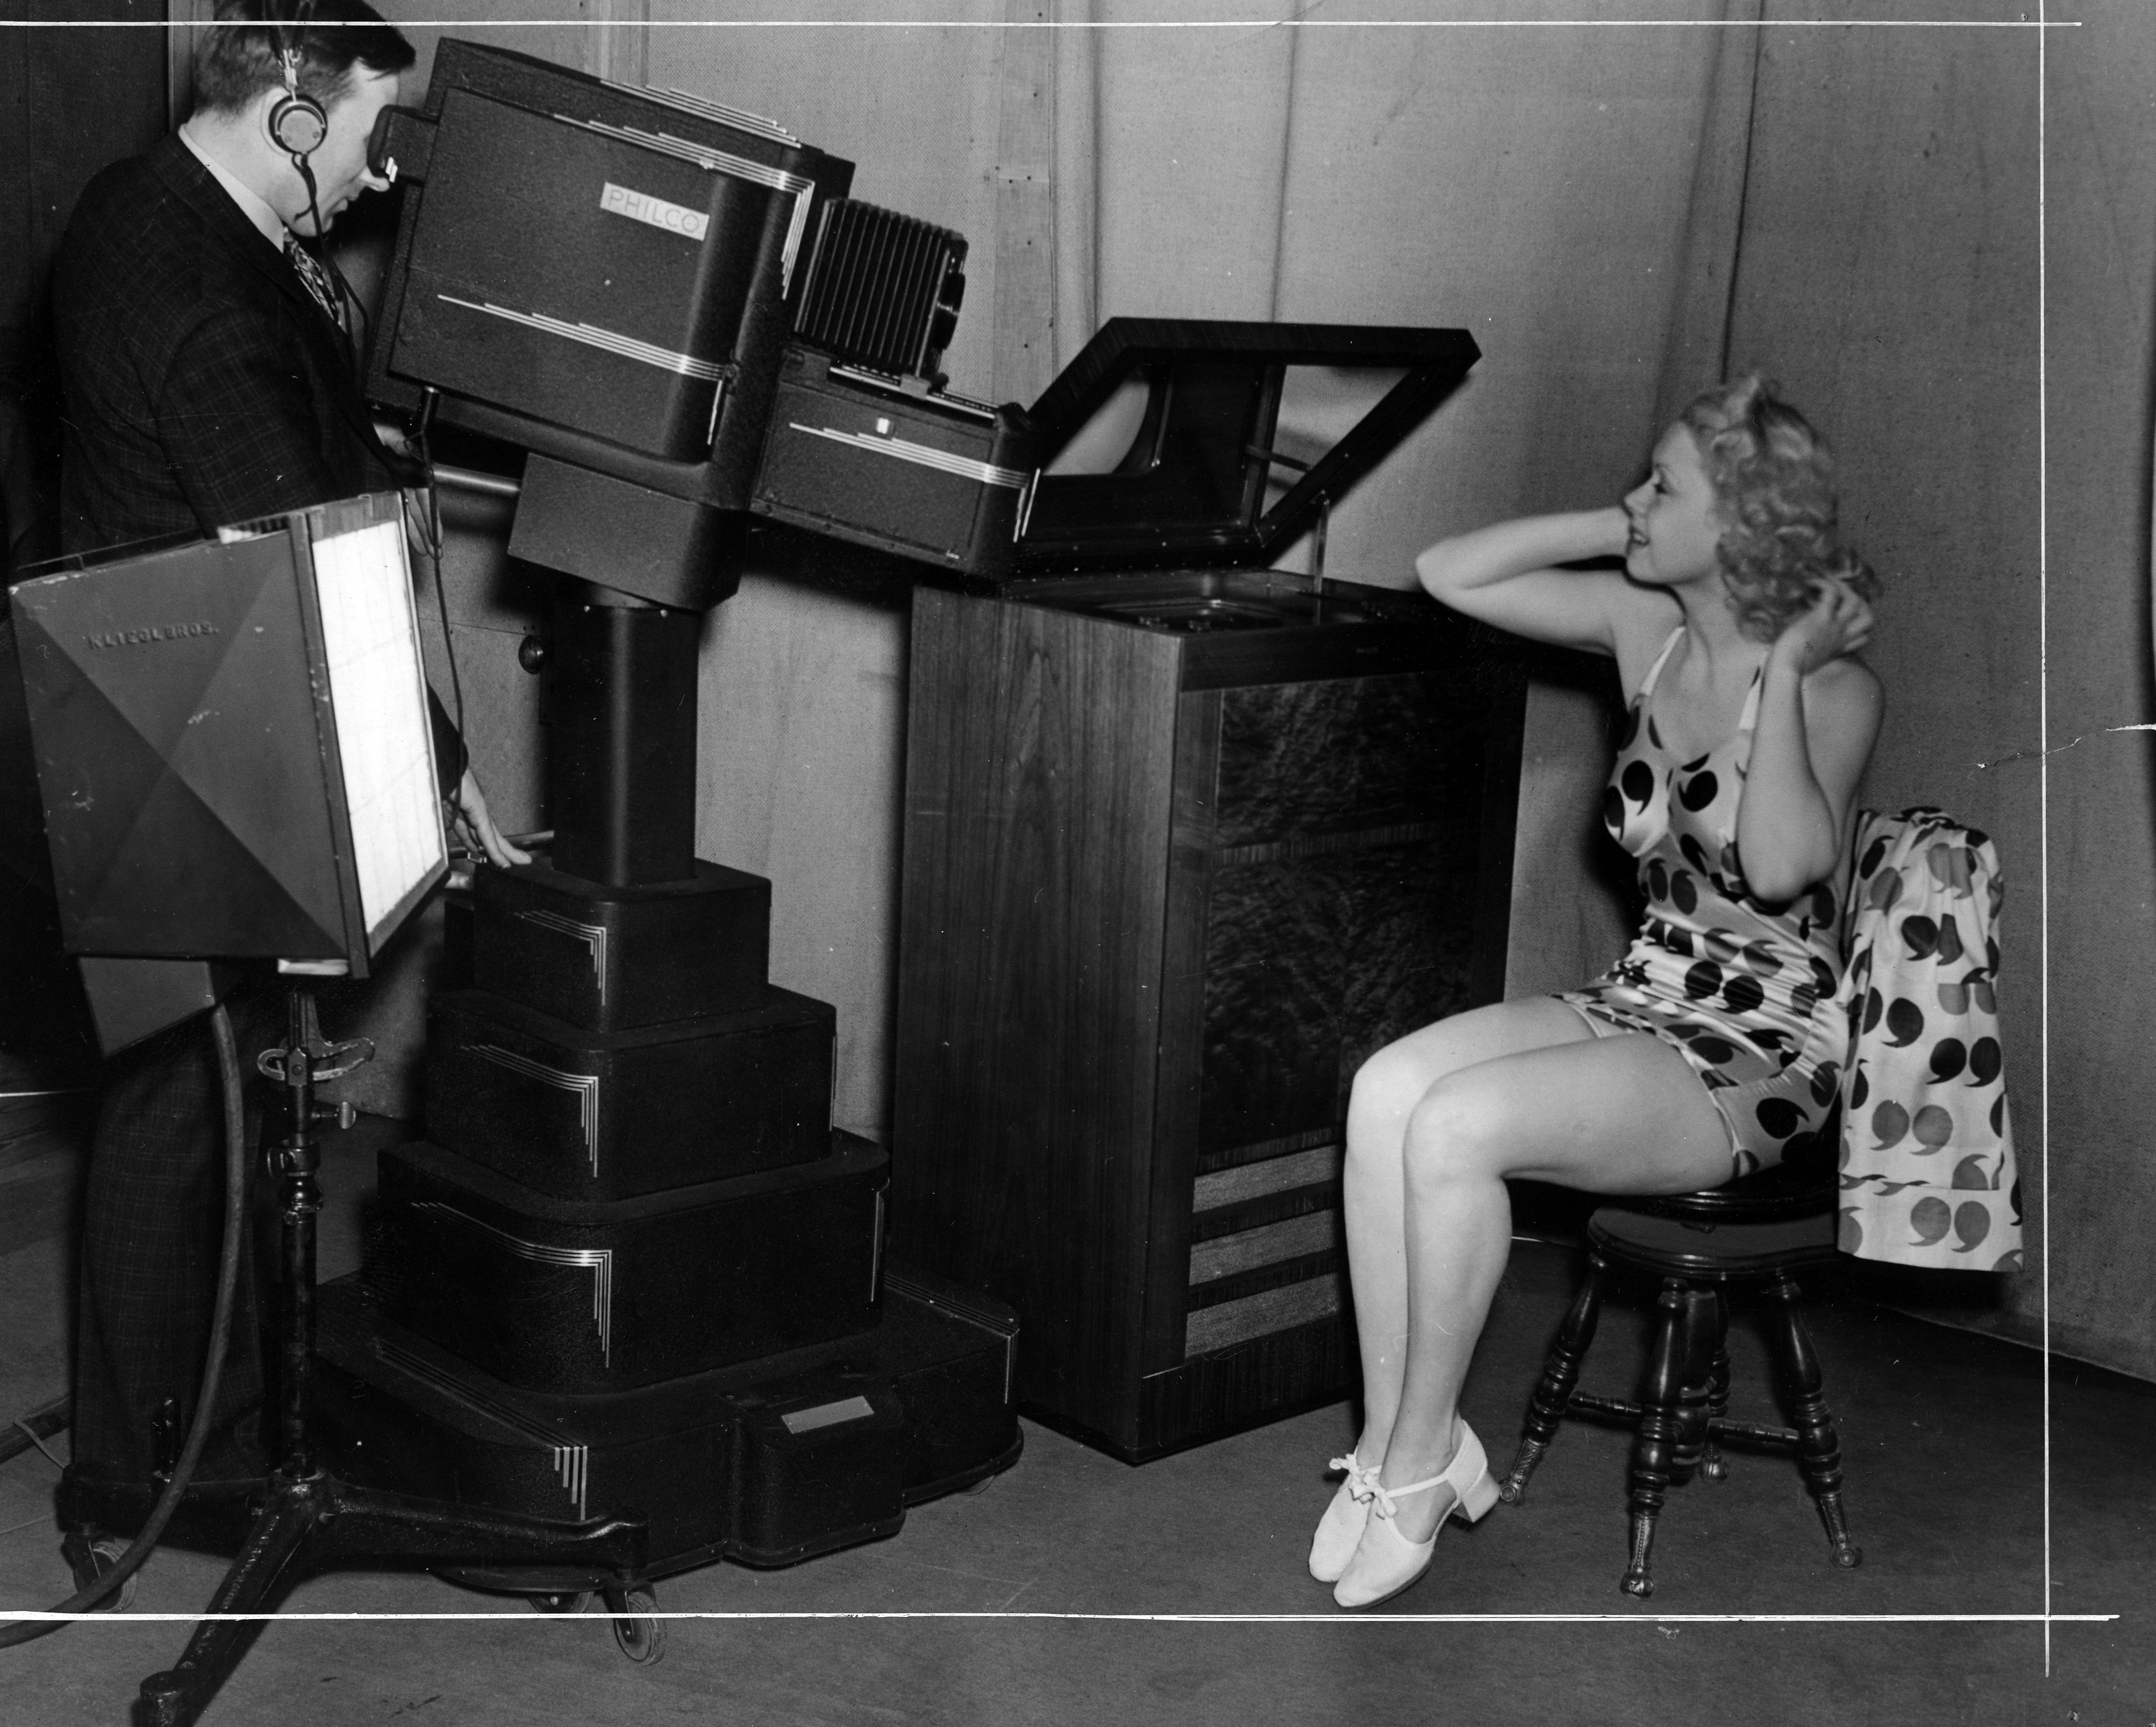 Toby Wing, screen and stage star, watches herself in the television receiving set as she performs before the new television equipment in the Philco Radio television station 